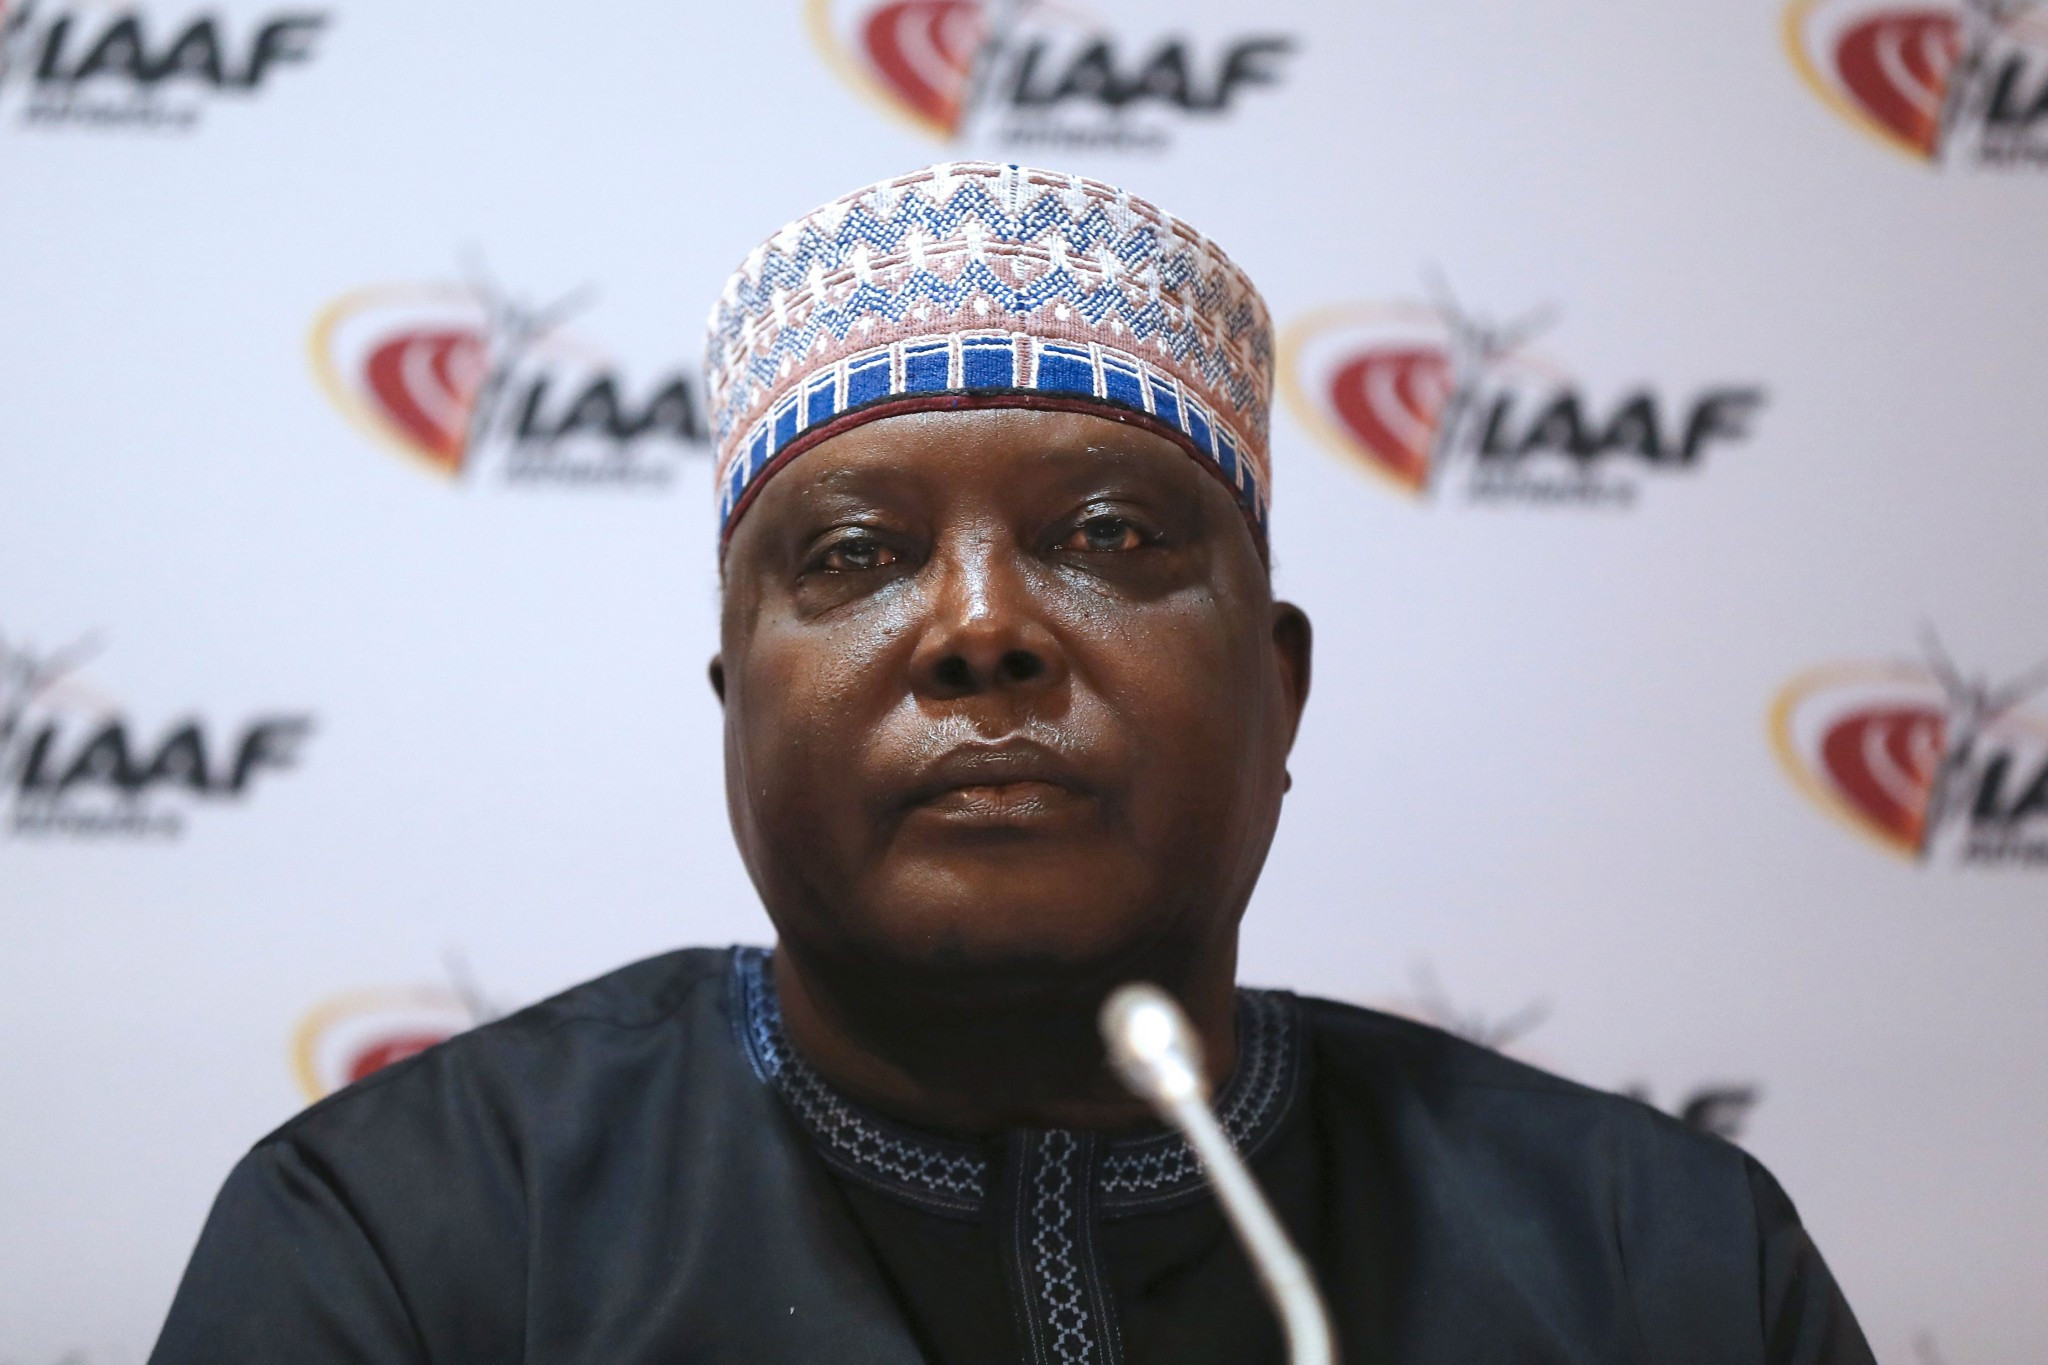 Exclusive: Six African countries targeted to host 2025 IAAF World Championships